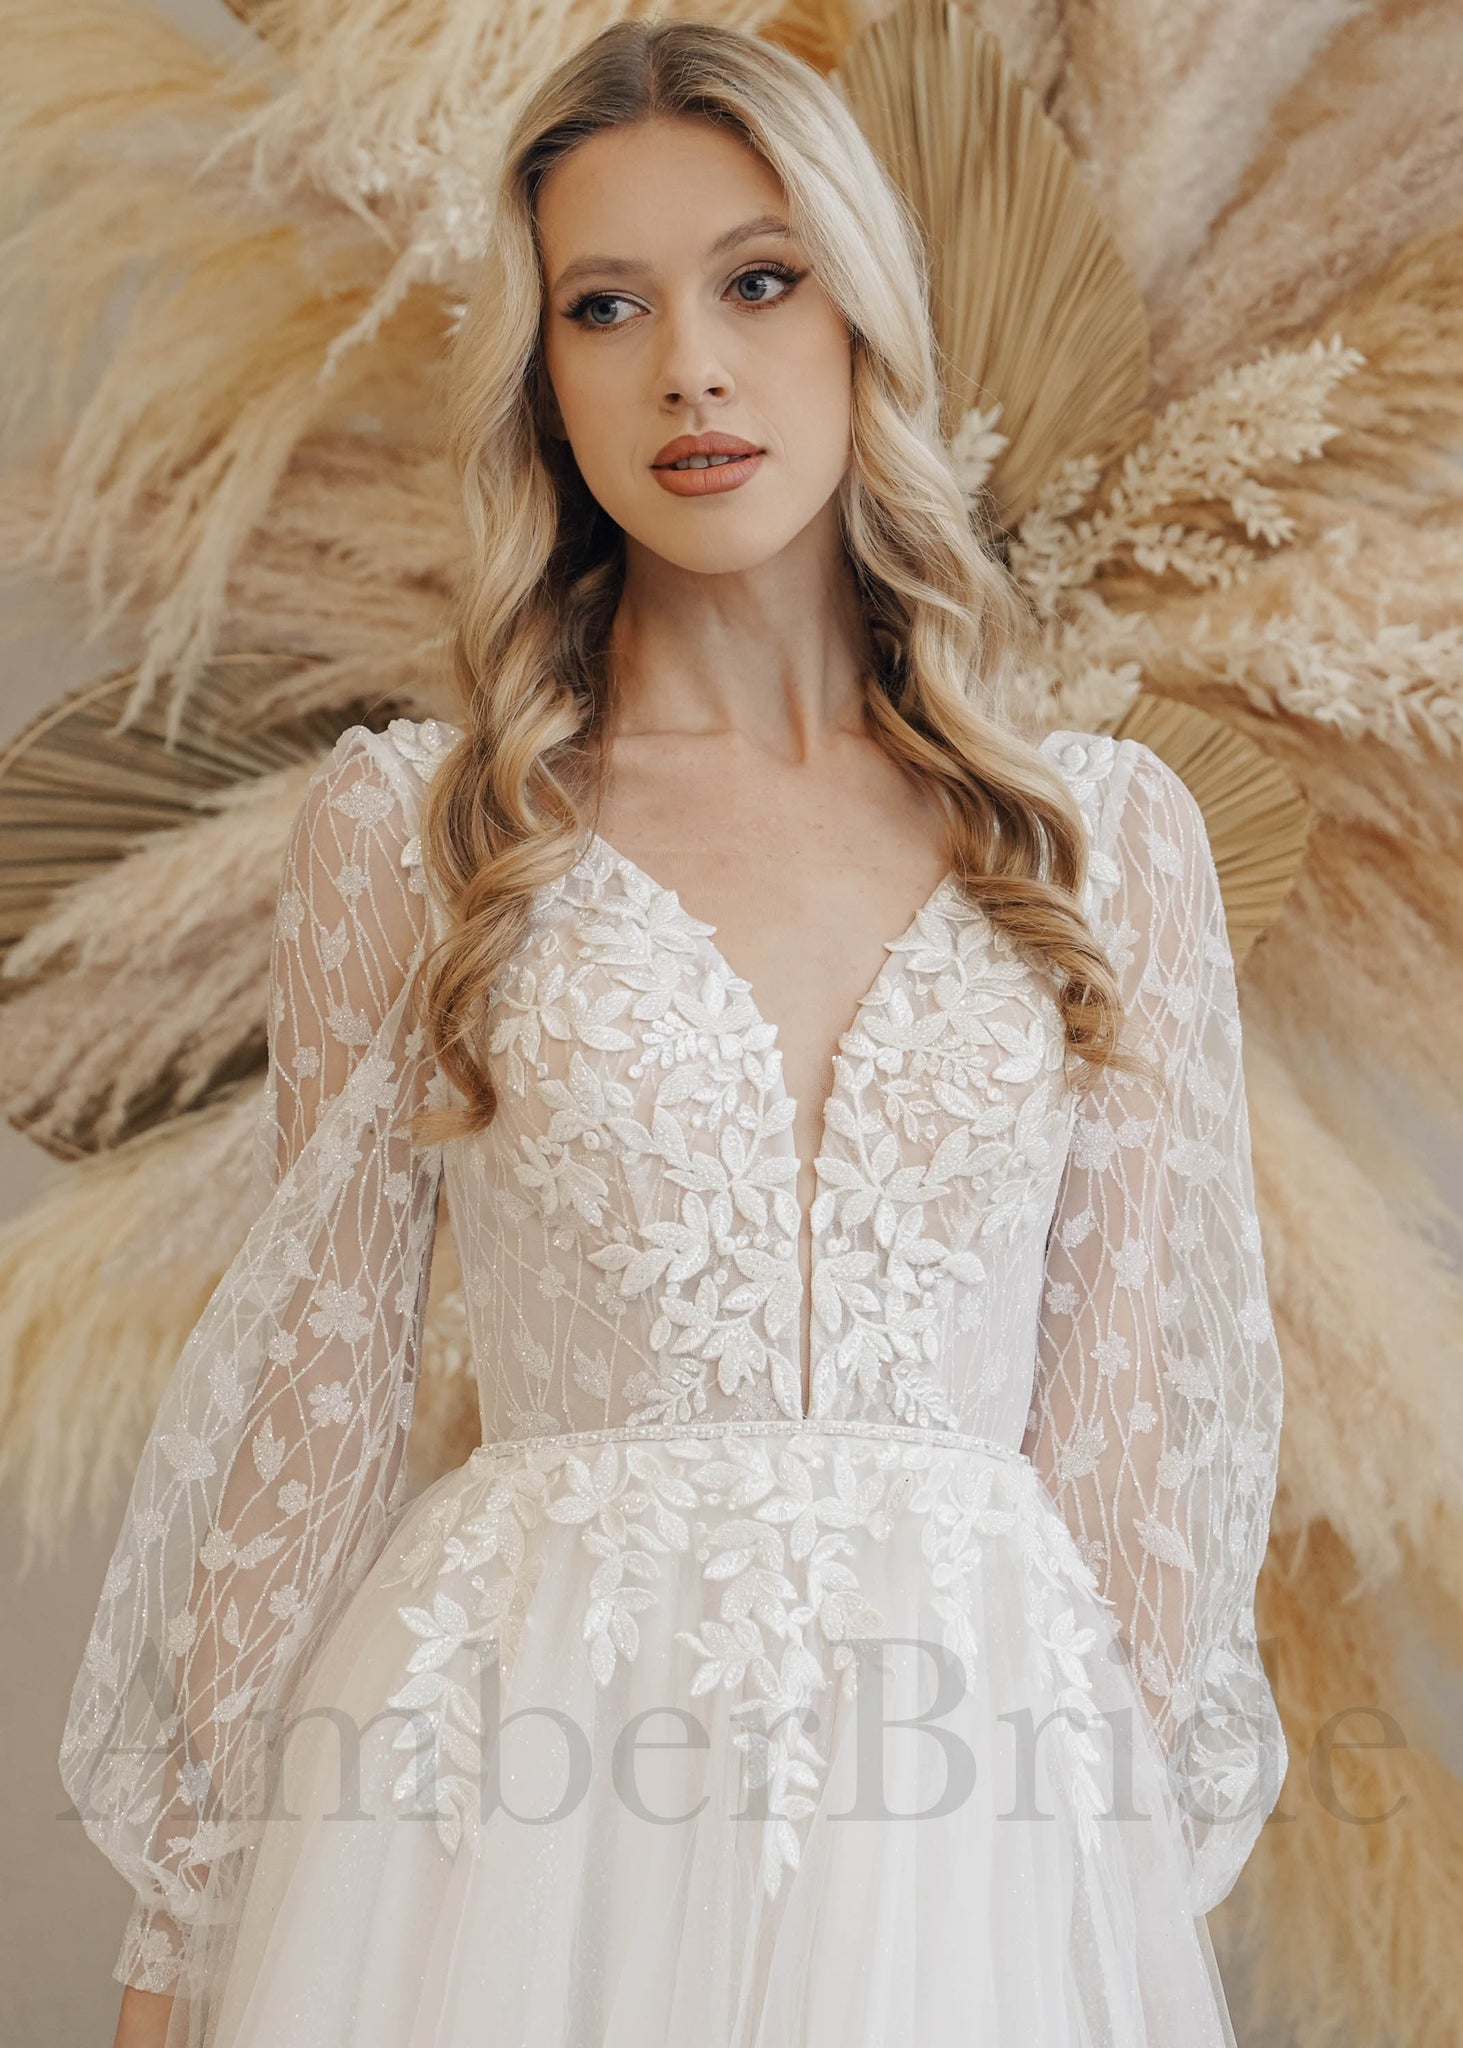 Rustic Floral Design Tulle Wedding Dress with Long Puffy Sleeves